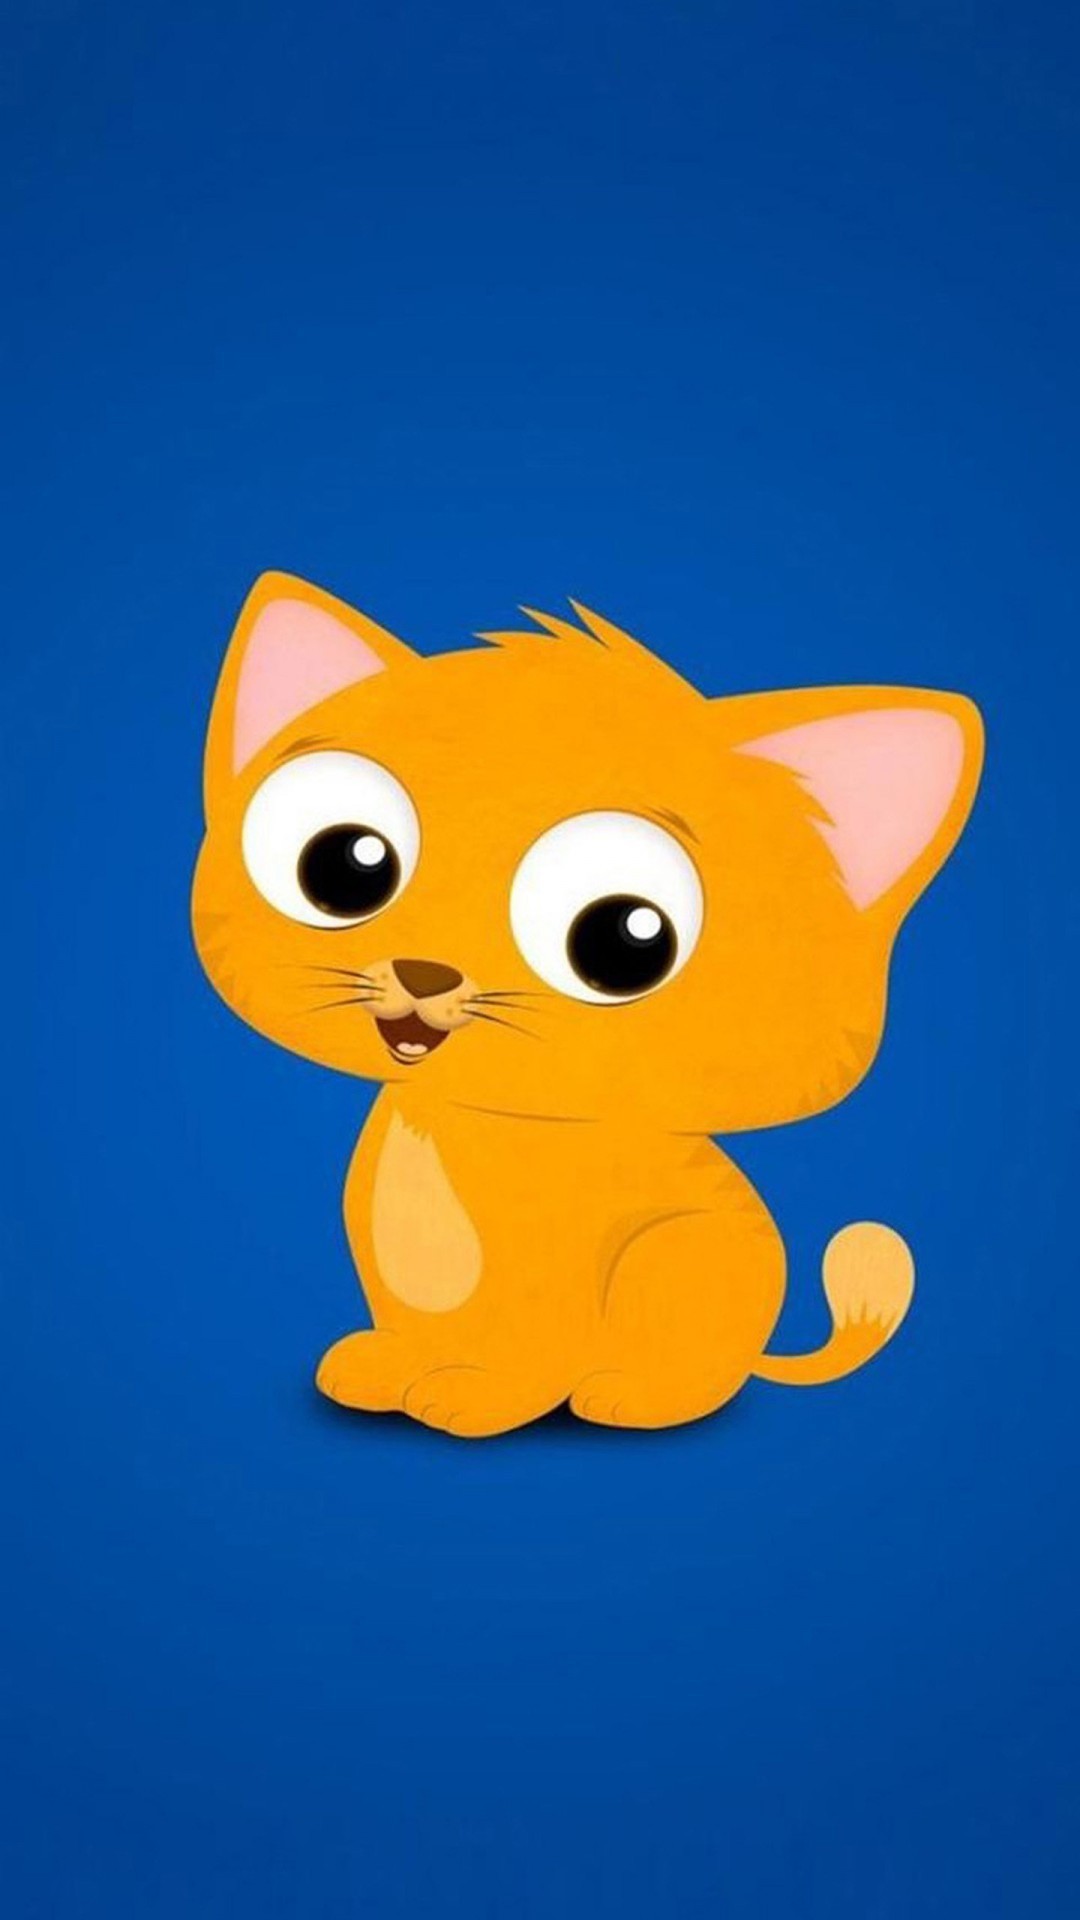 Download 0. More Cute Cats wallpapers